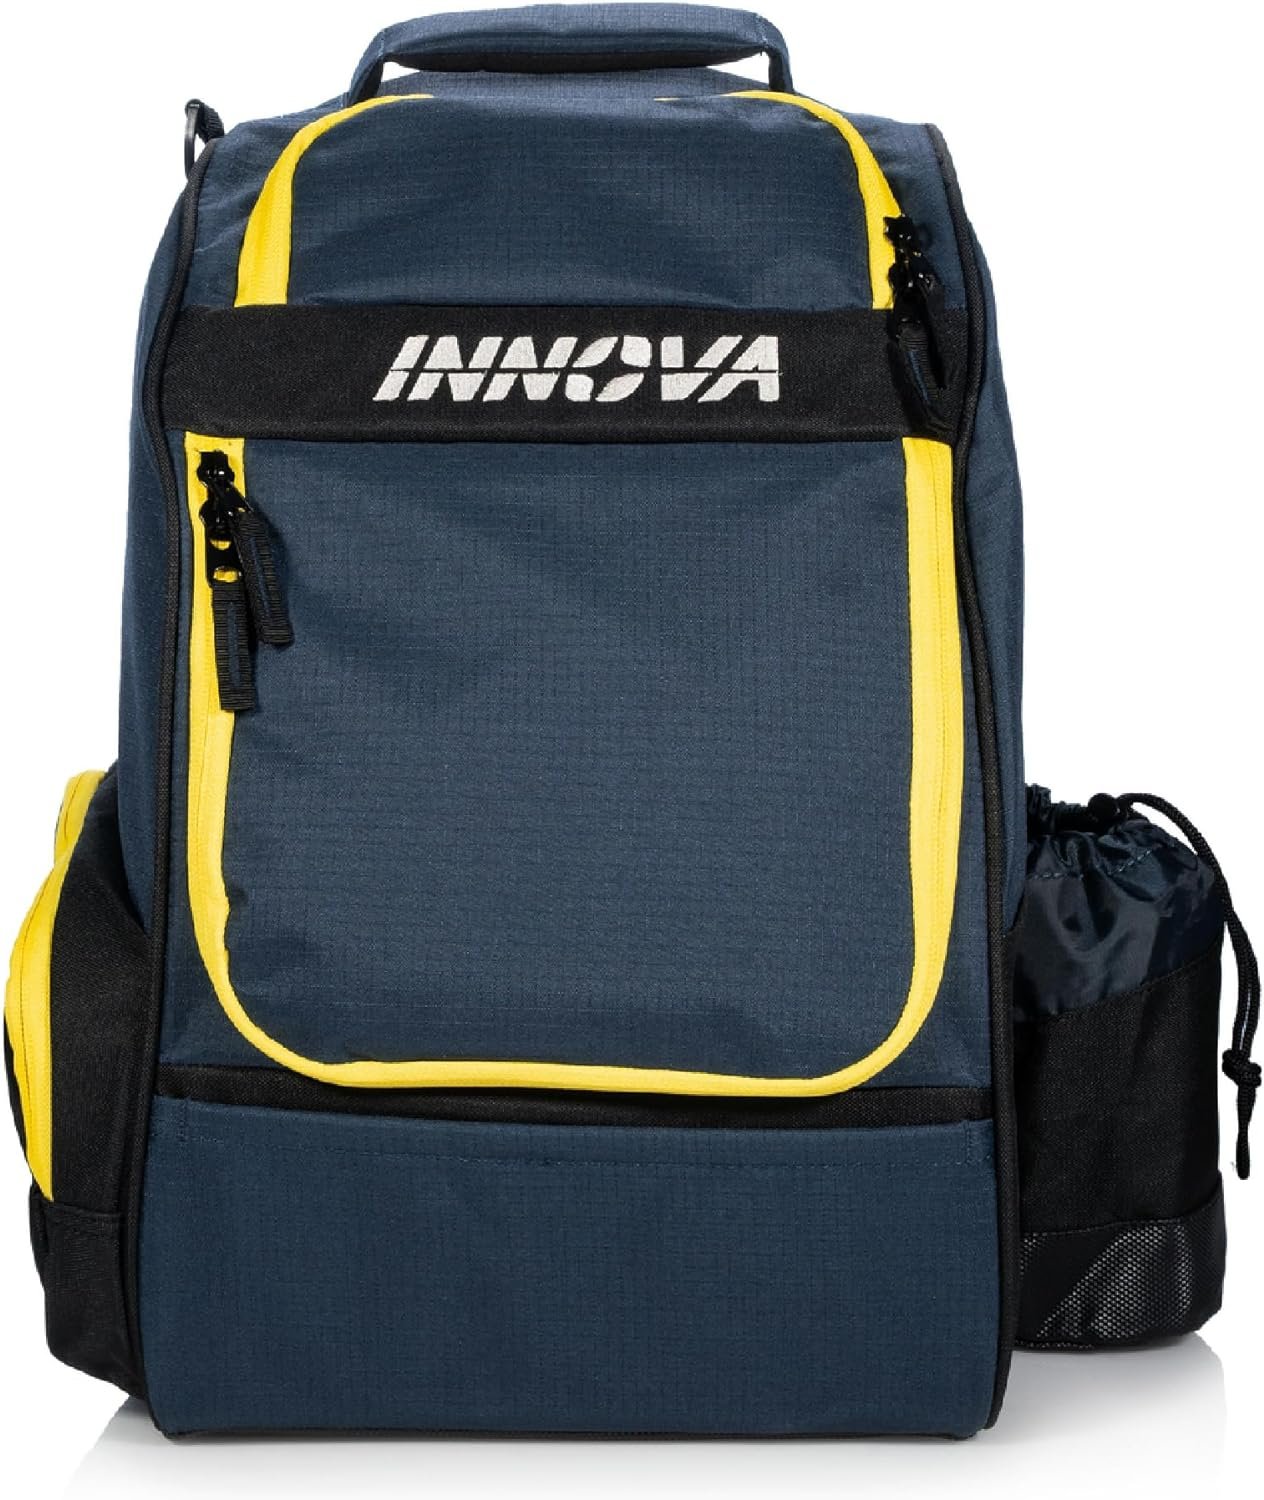 Innova Adventure Pack Backpack Disc Golf Bag – Holds 25 Discs – Lightweight – Includes Limited Edition Stars Mini